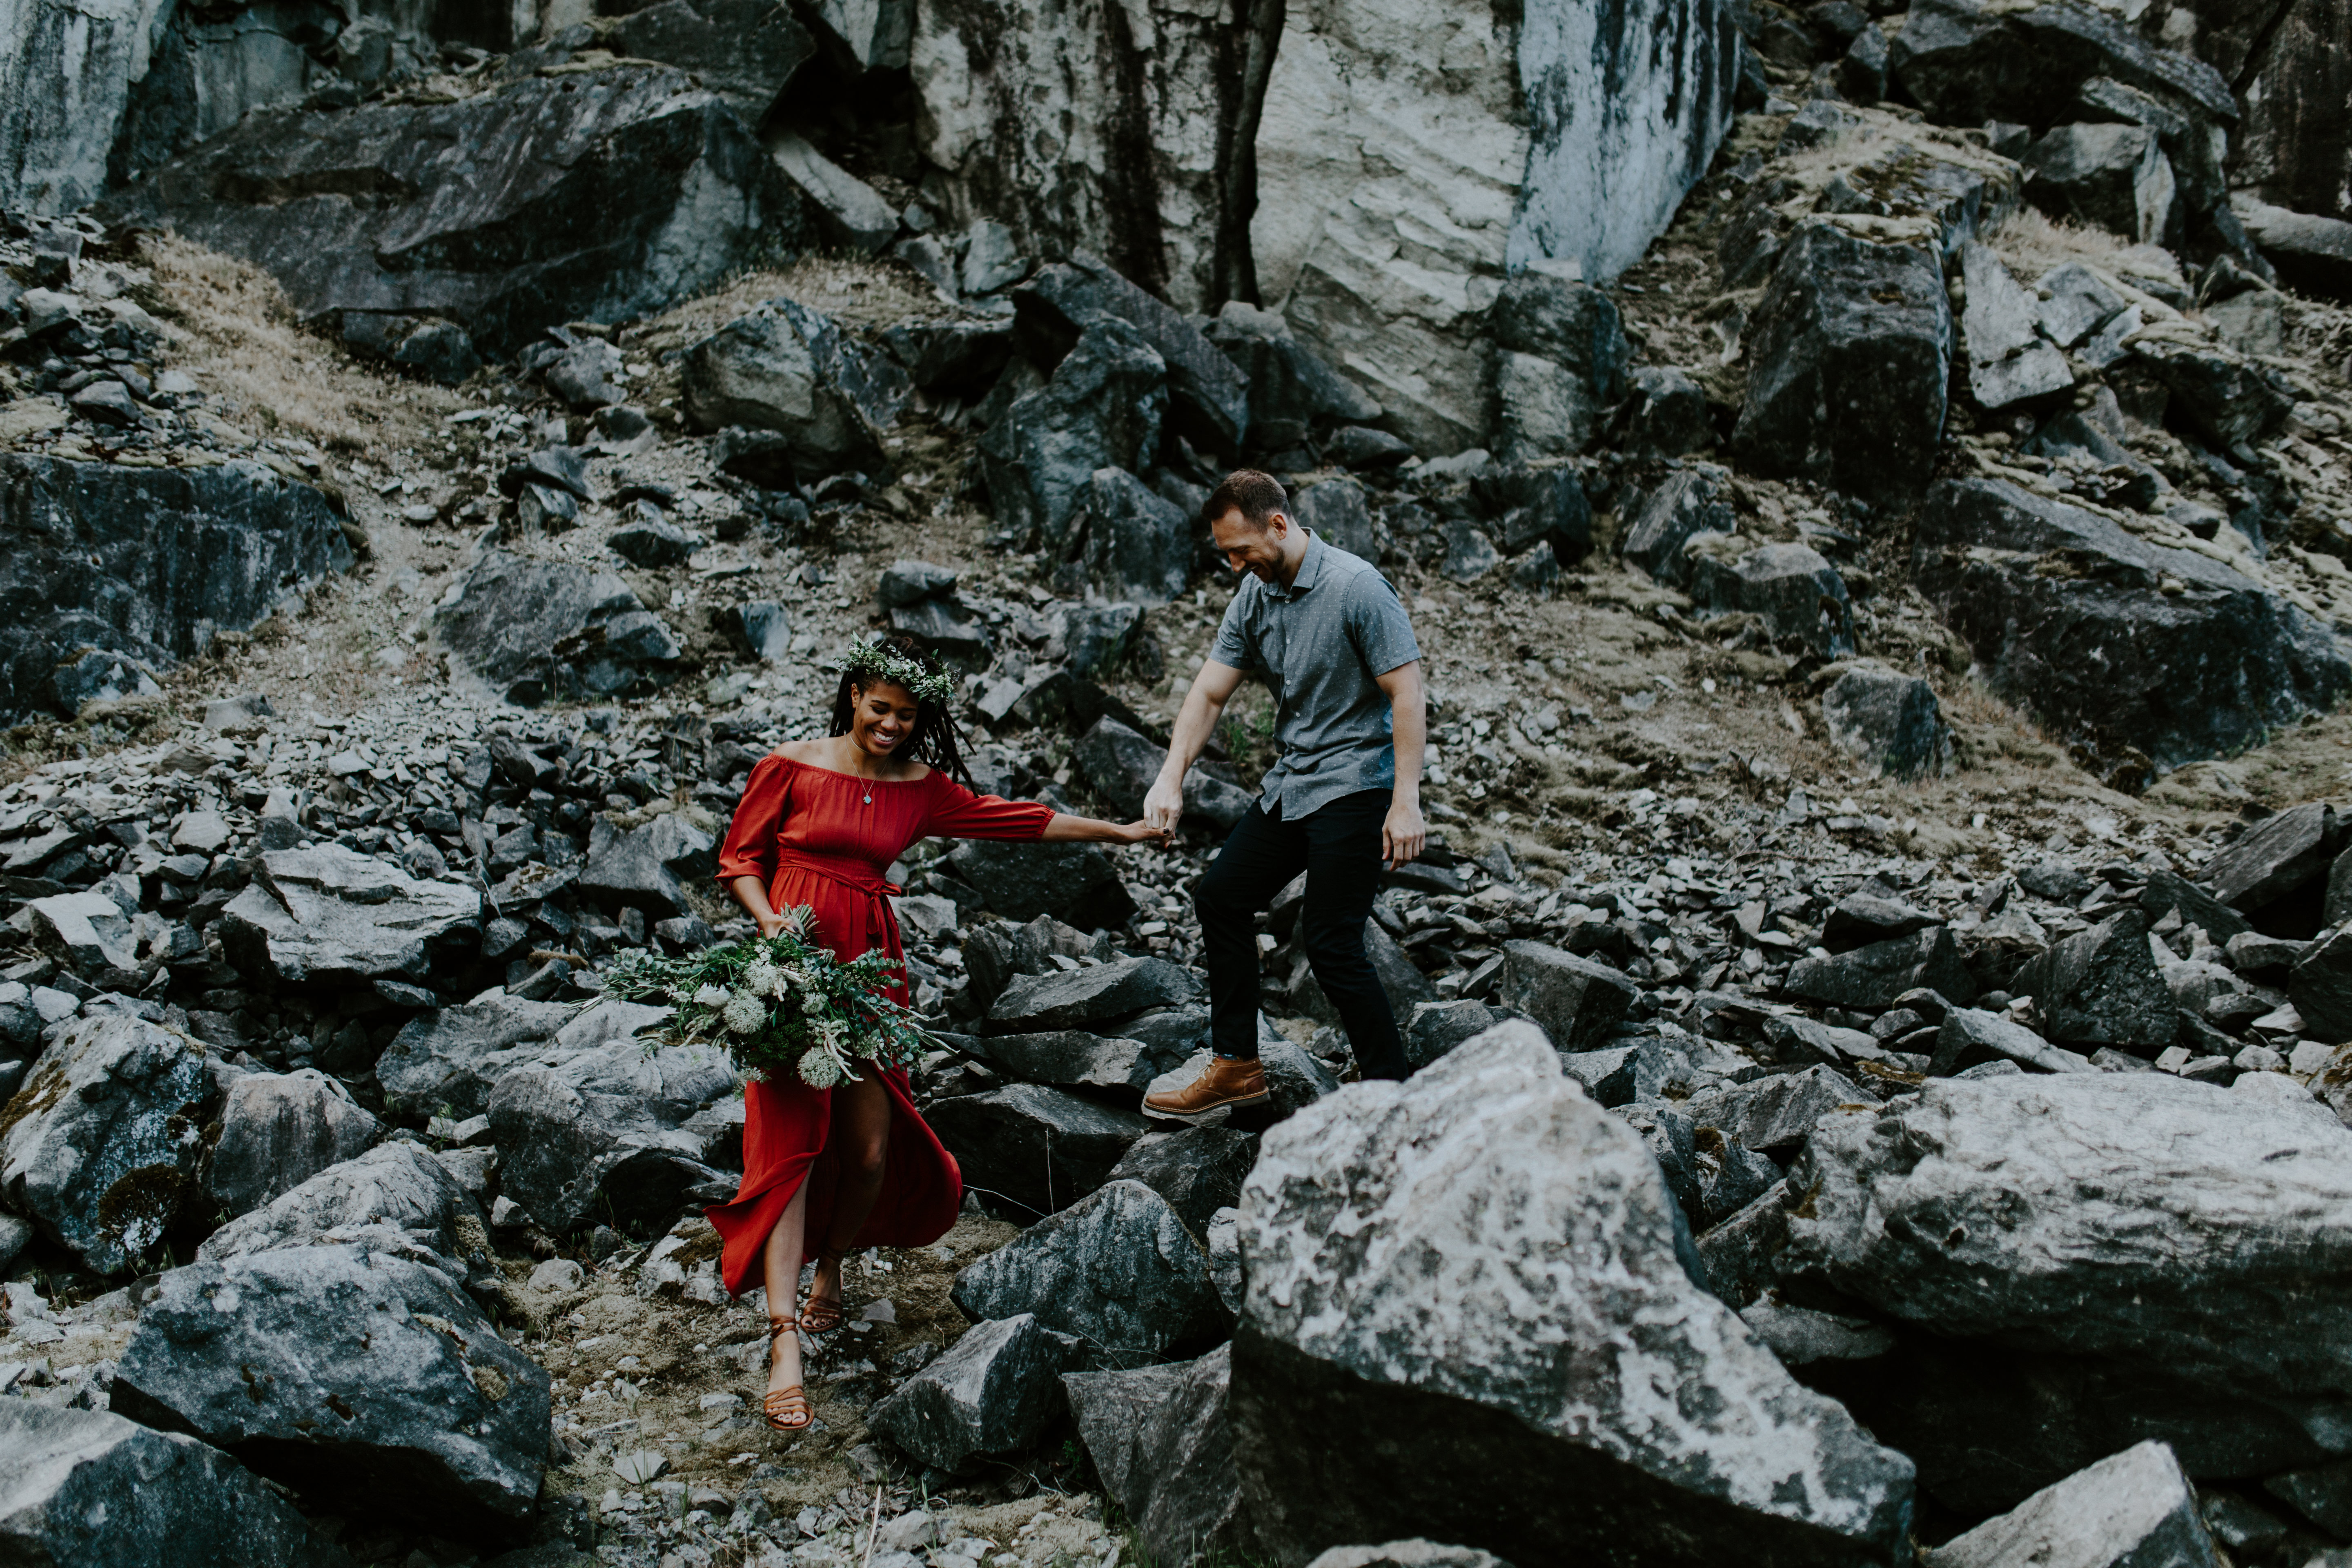 Kayloni and Garrett make their way down the rocks at the Columbia River Gorge in Oregon. Engagement photography in Portland Oregon by Sienna Plus Josh.